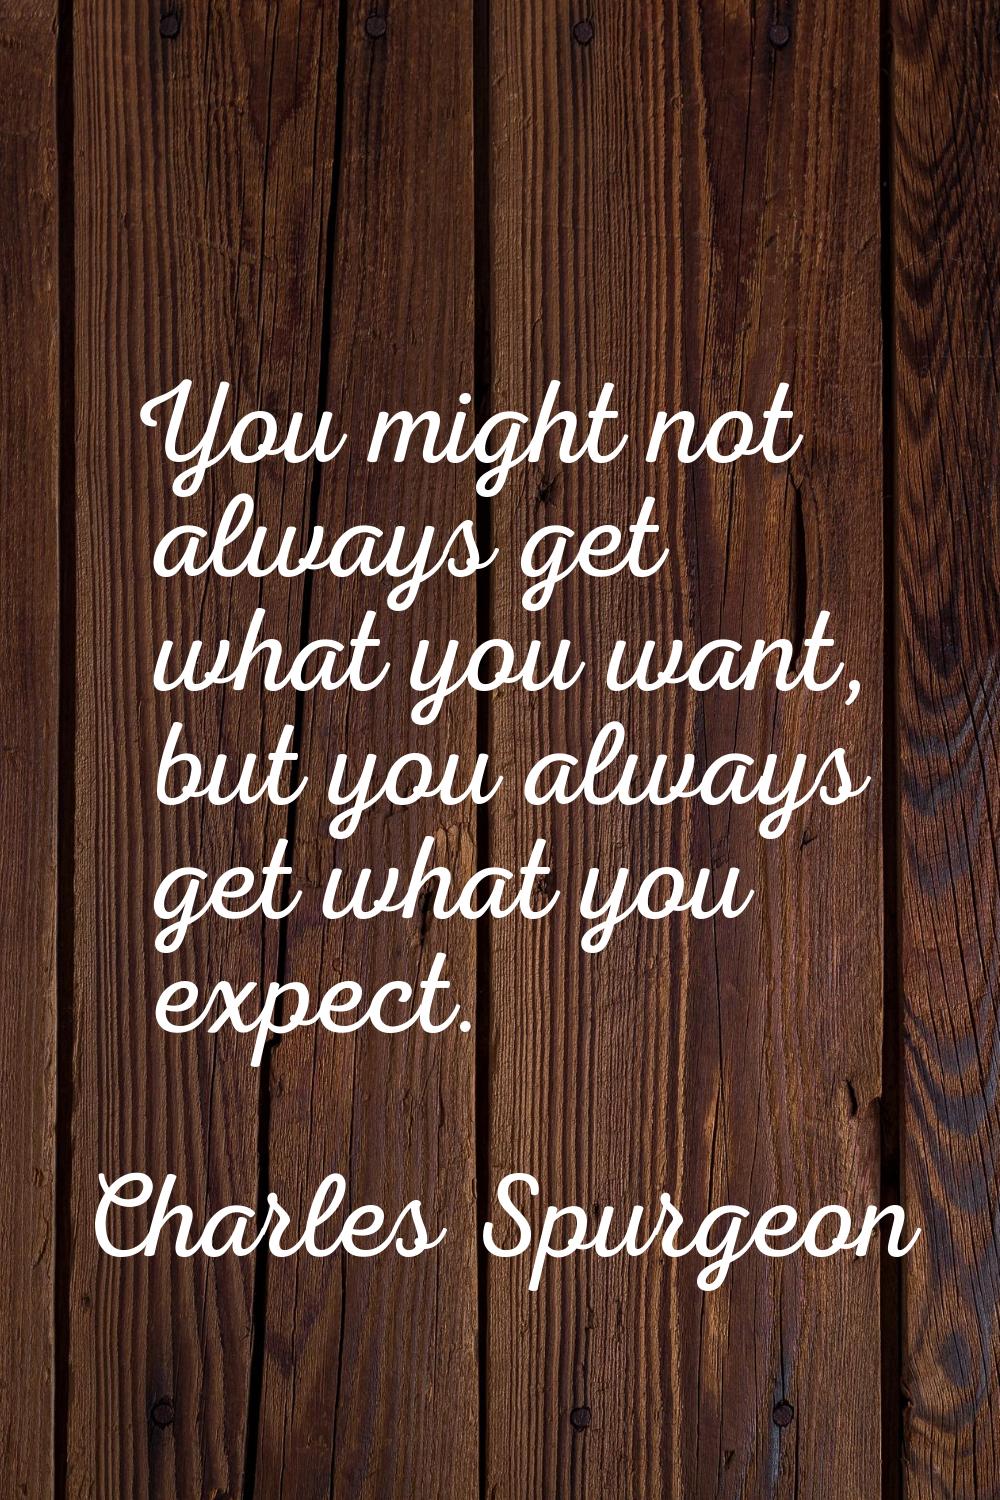 You might not always get what you want, but you always get what you expect.